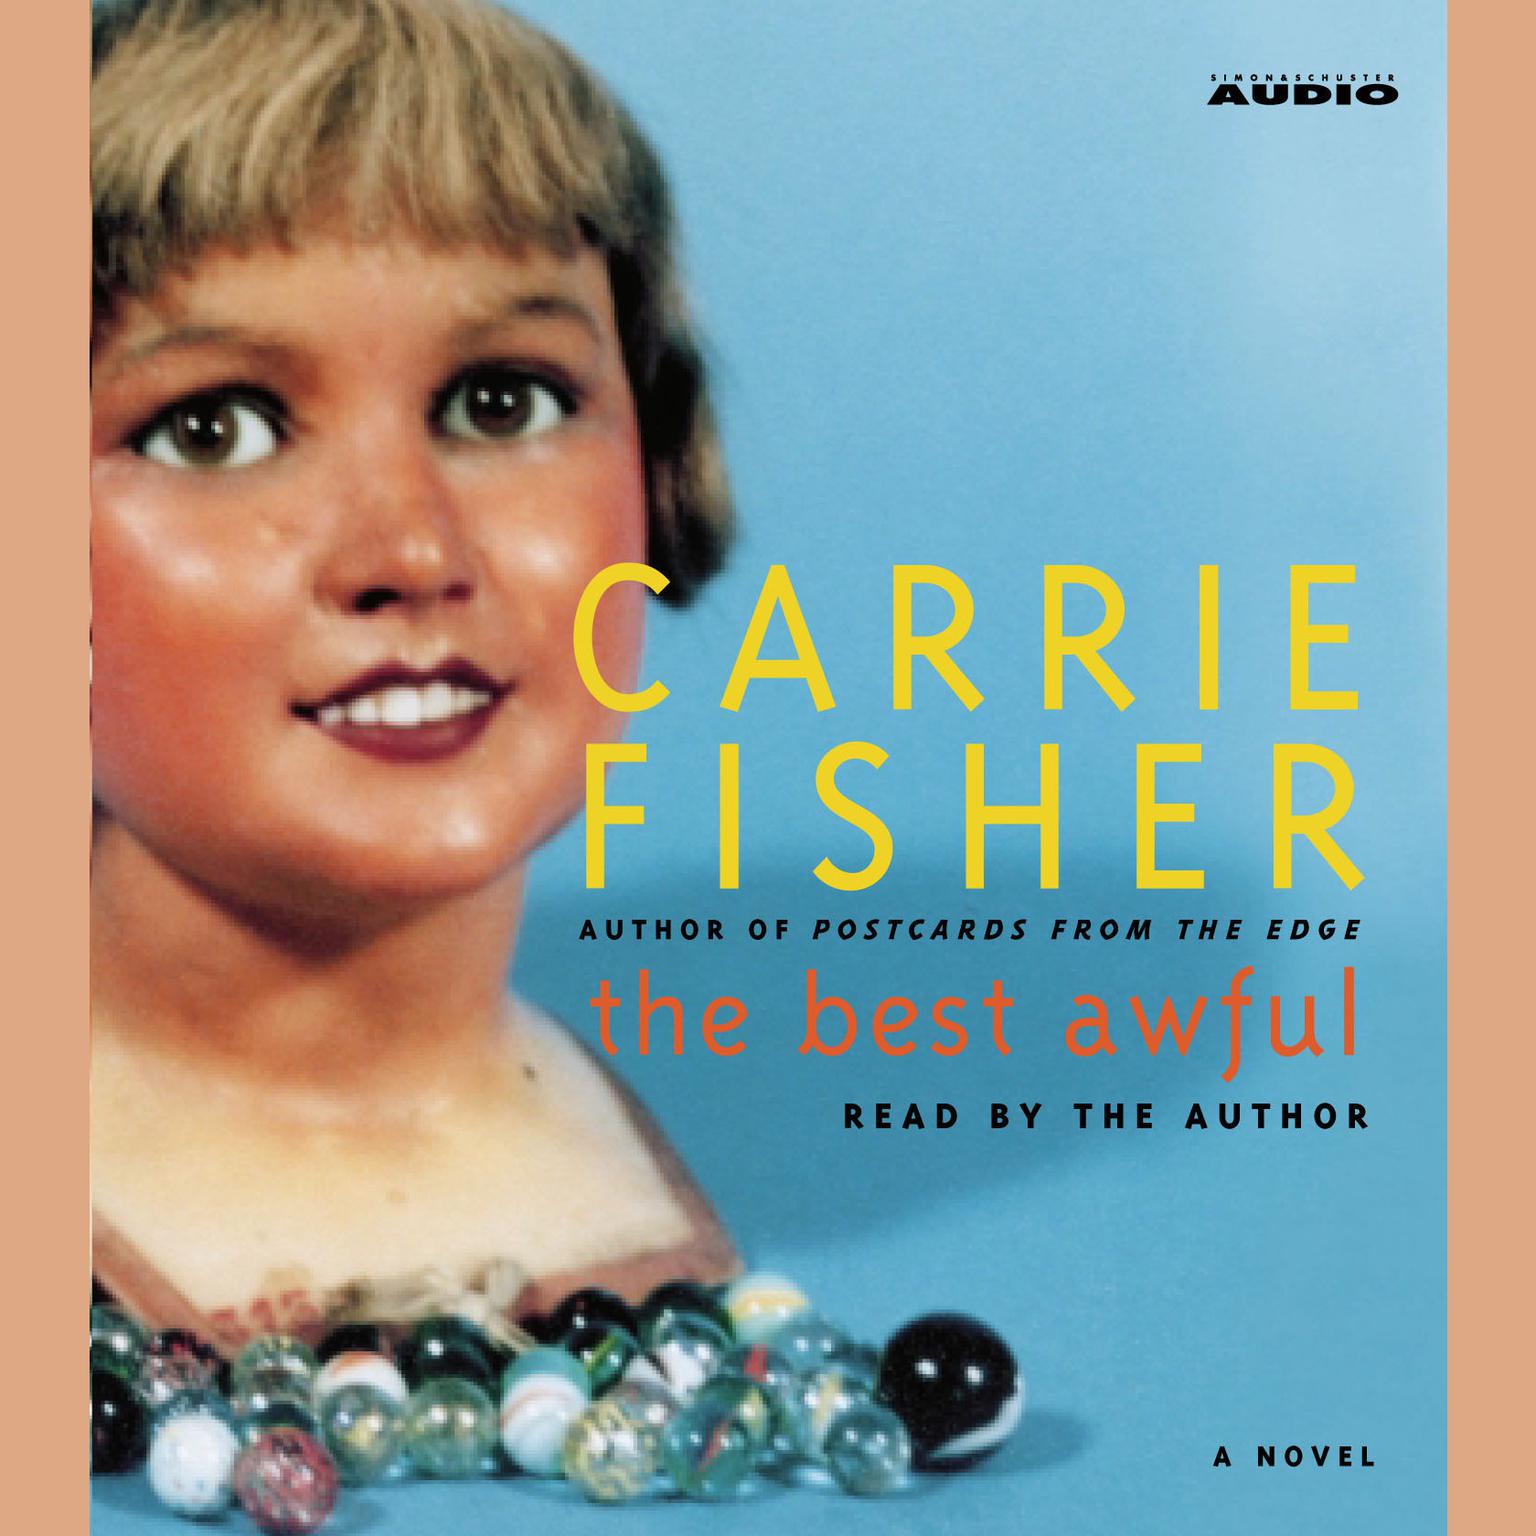 The Best Awful (Abridged): A Novel Audiobook, by Carrie Fisher